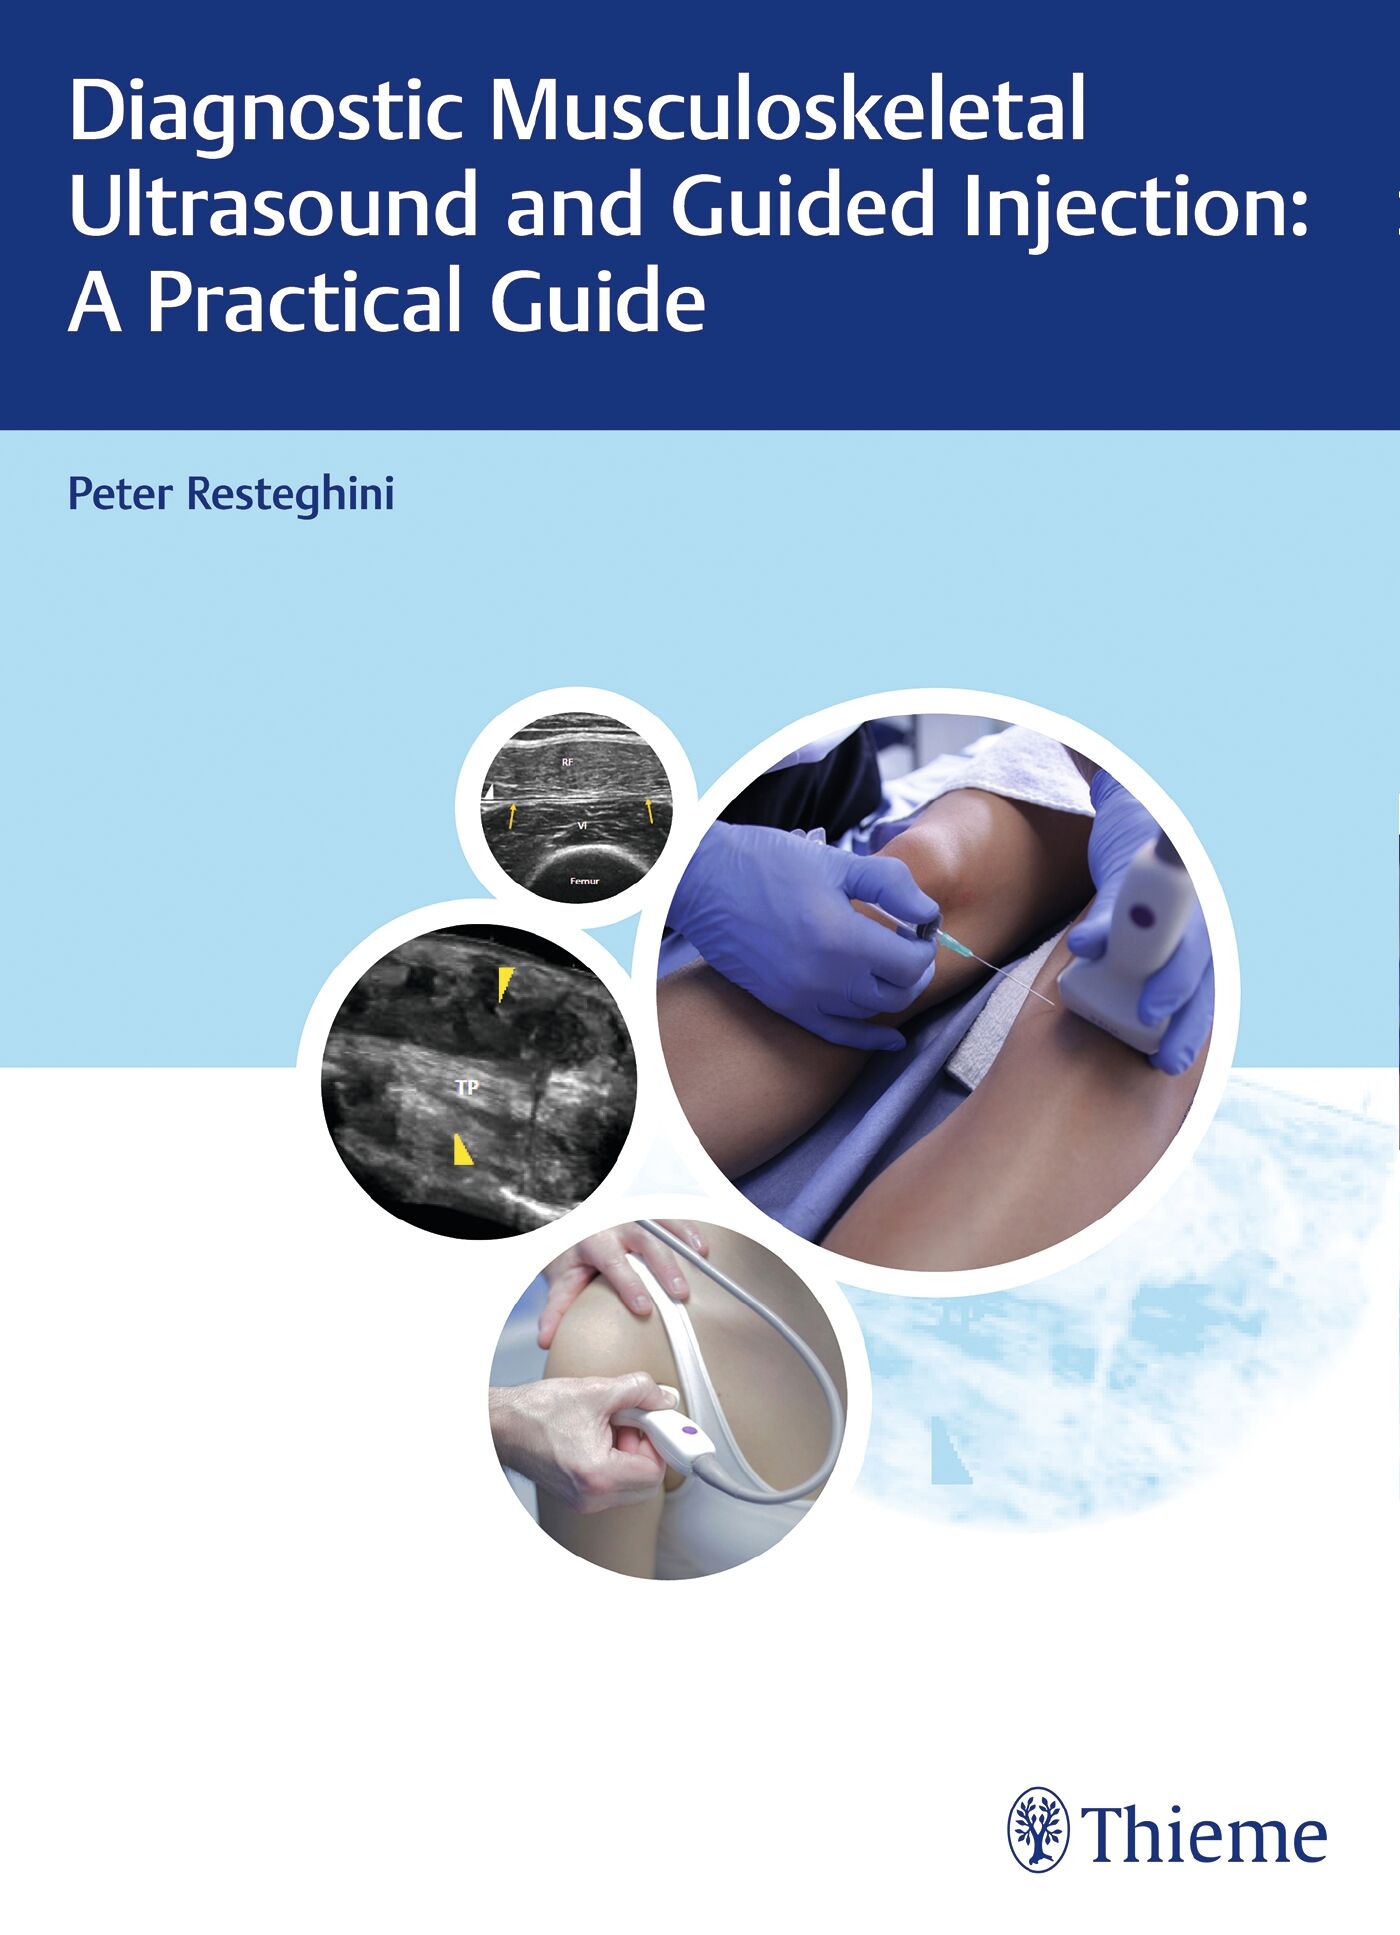 Diagnostic Musculoskeletal Ultrasound and Guided Injection: A Practical Guide, 9783132203815